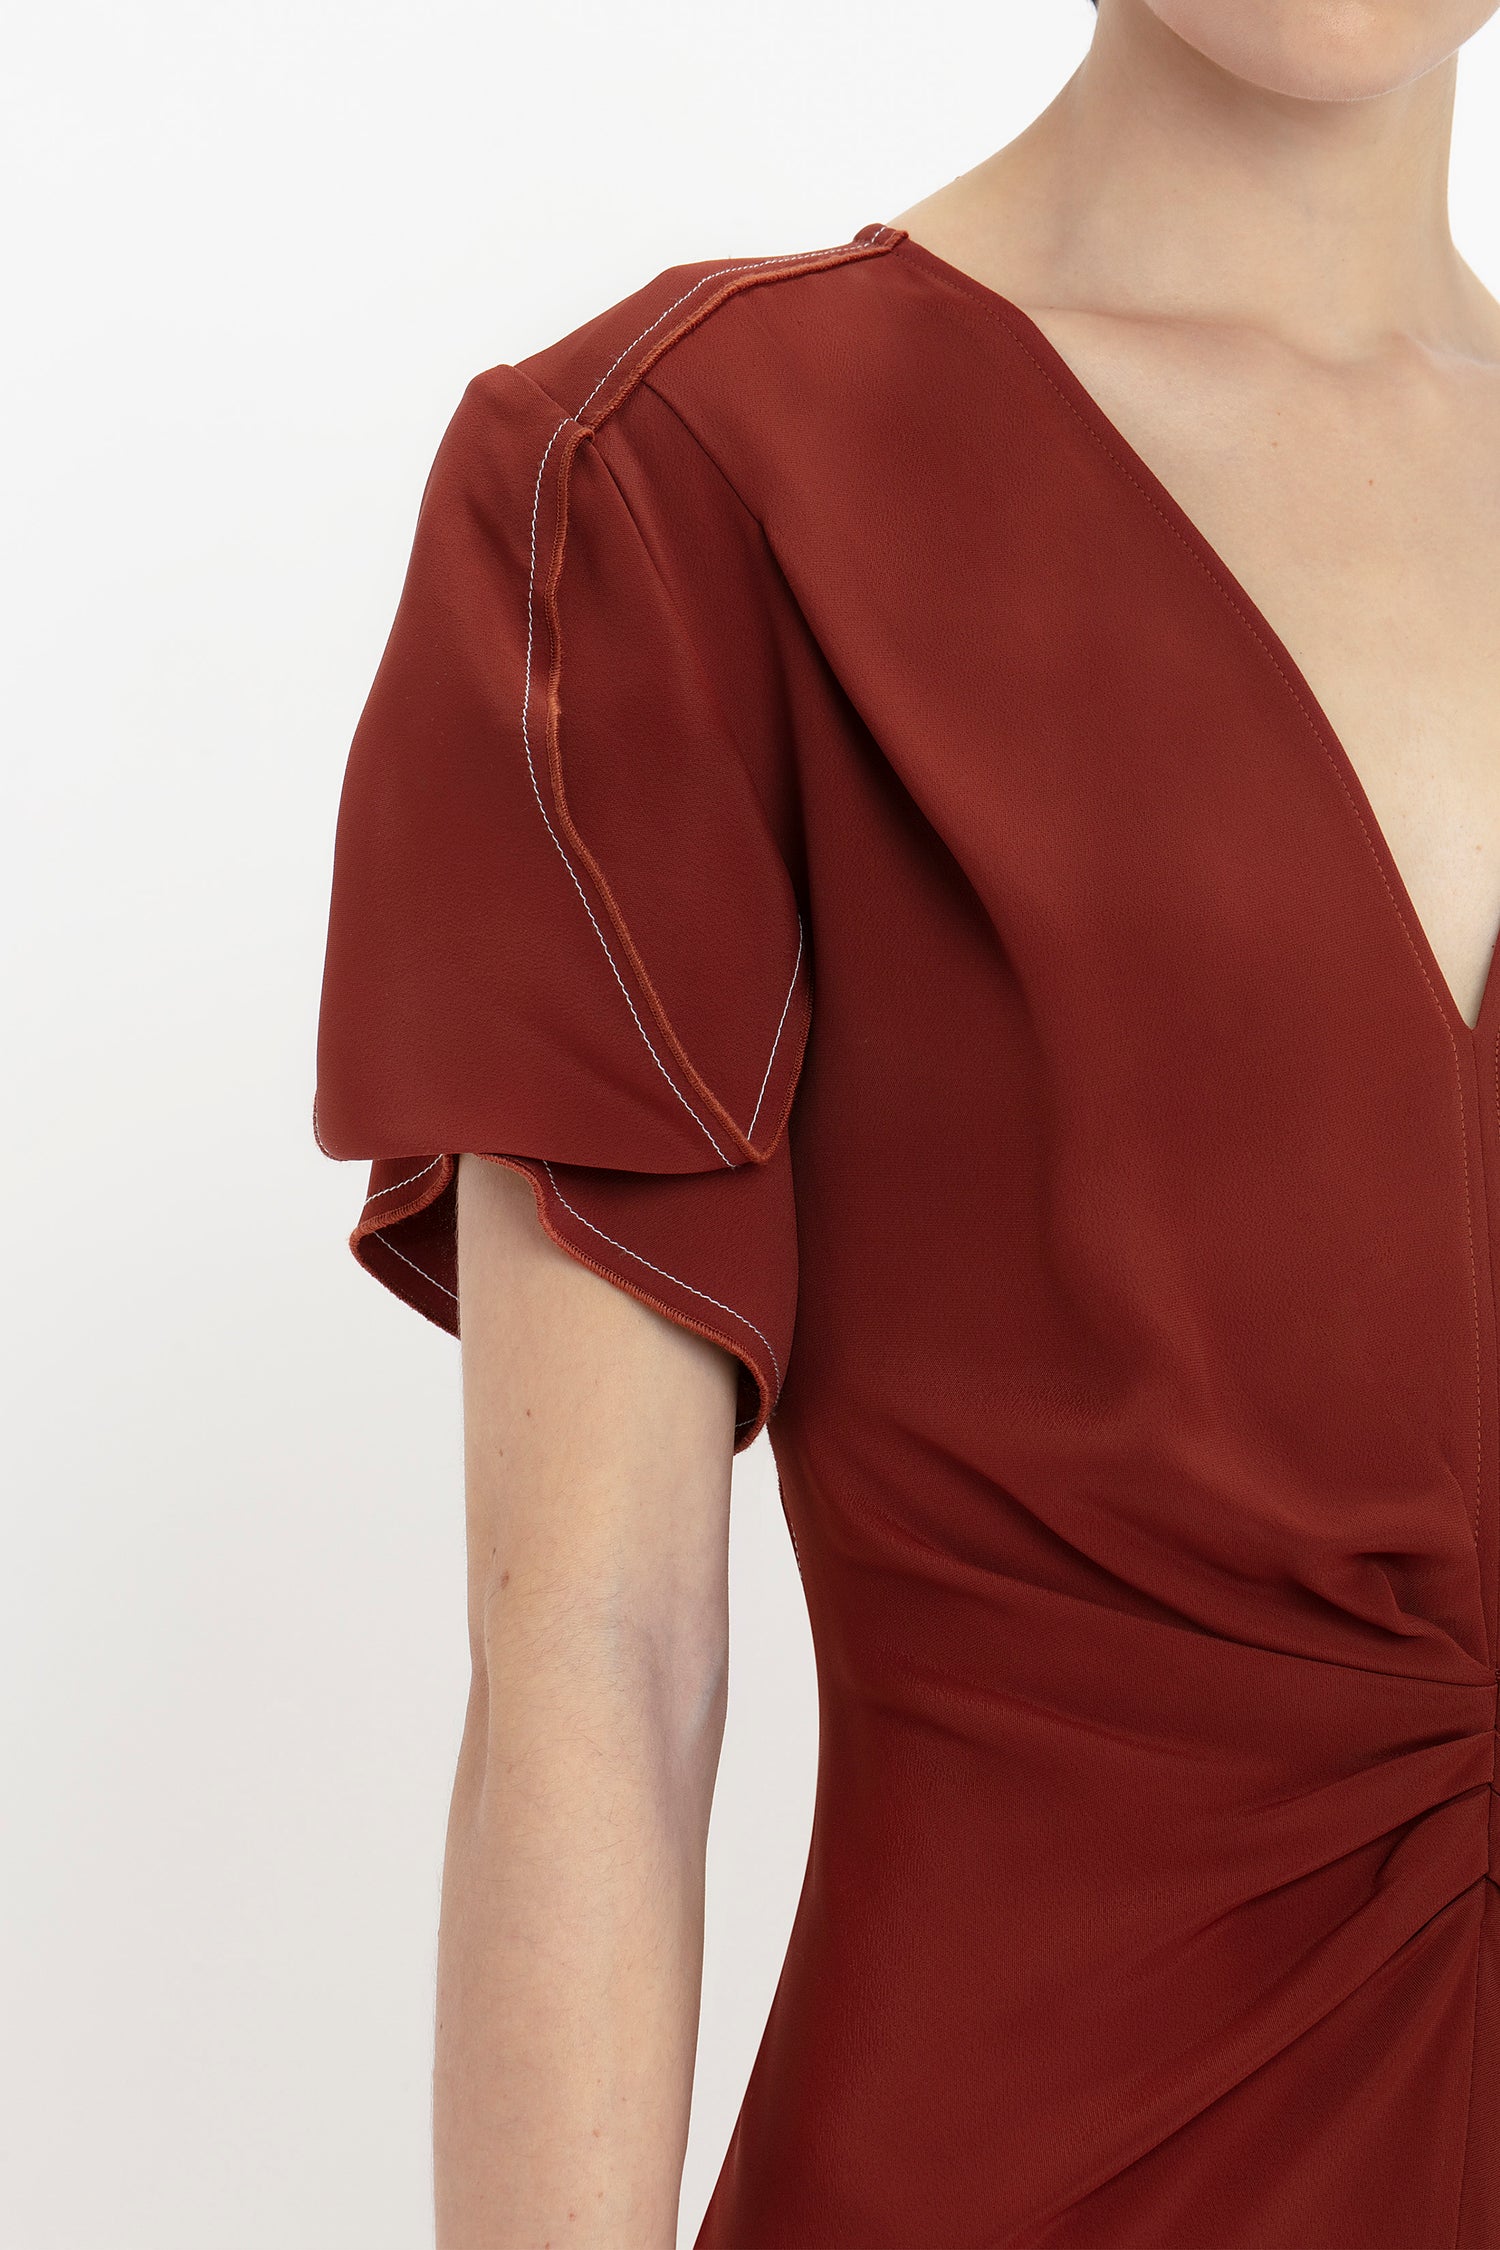 A person is wearing a deep red Gathered V-Neck Midi Dress In Russet by Victoria Beckham with short, puffed sleeves and visible white stitching along the sleeve seams. The figure-flattering stretch fabric showcases a waist-defining pleat detail that adds elegance to the look.